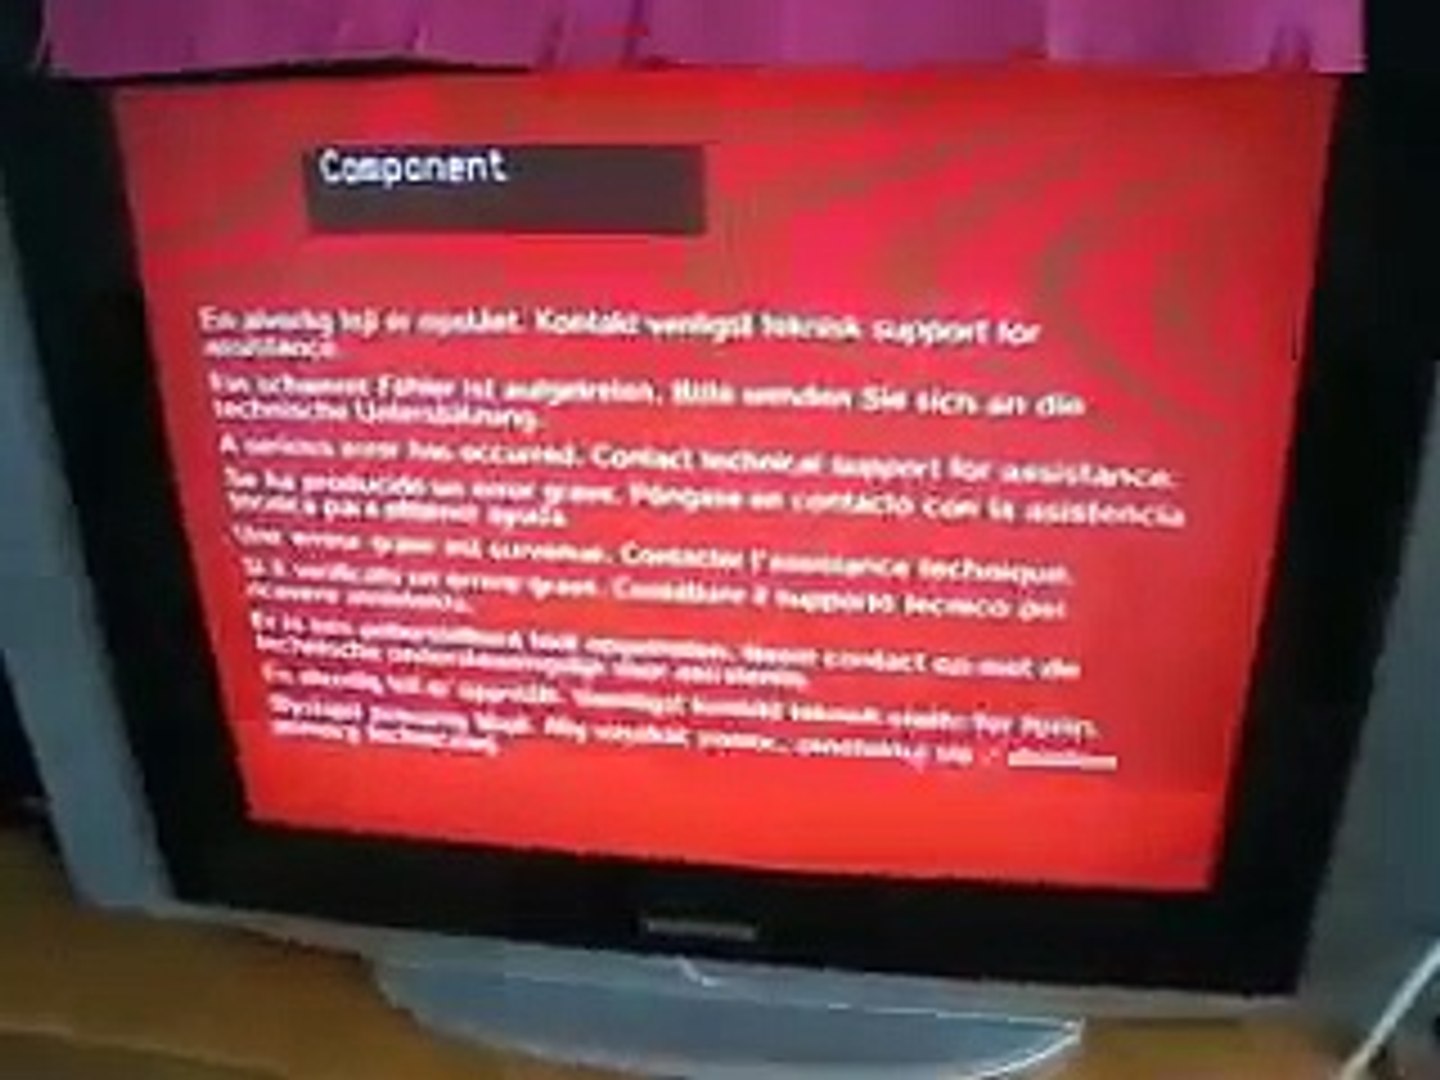 ps3 red screen of death. no trouble shoot solution - video Dailymotion